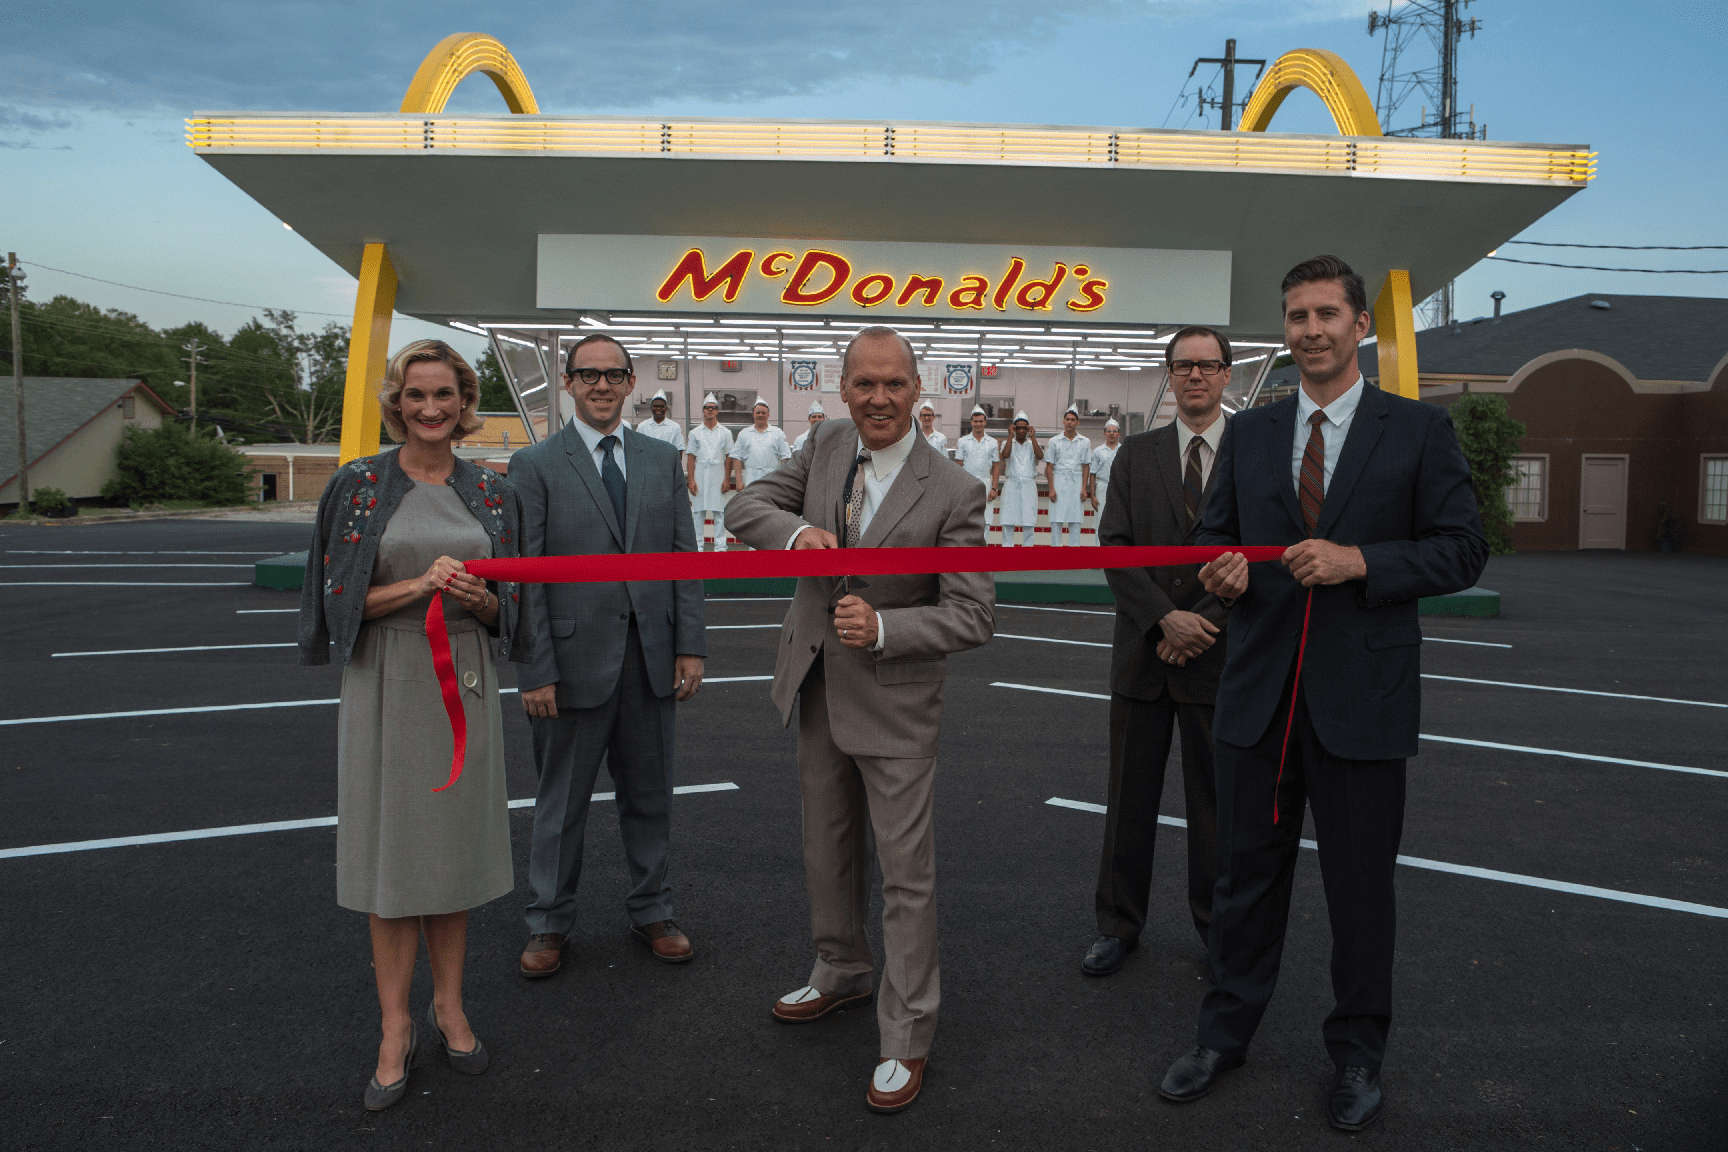 Ray Kroc (Michael Keaton) cuts tape in "The Founder". (Shaw Organisation)